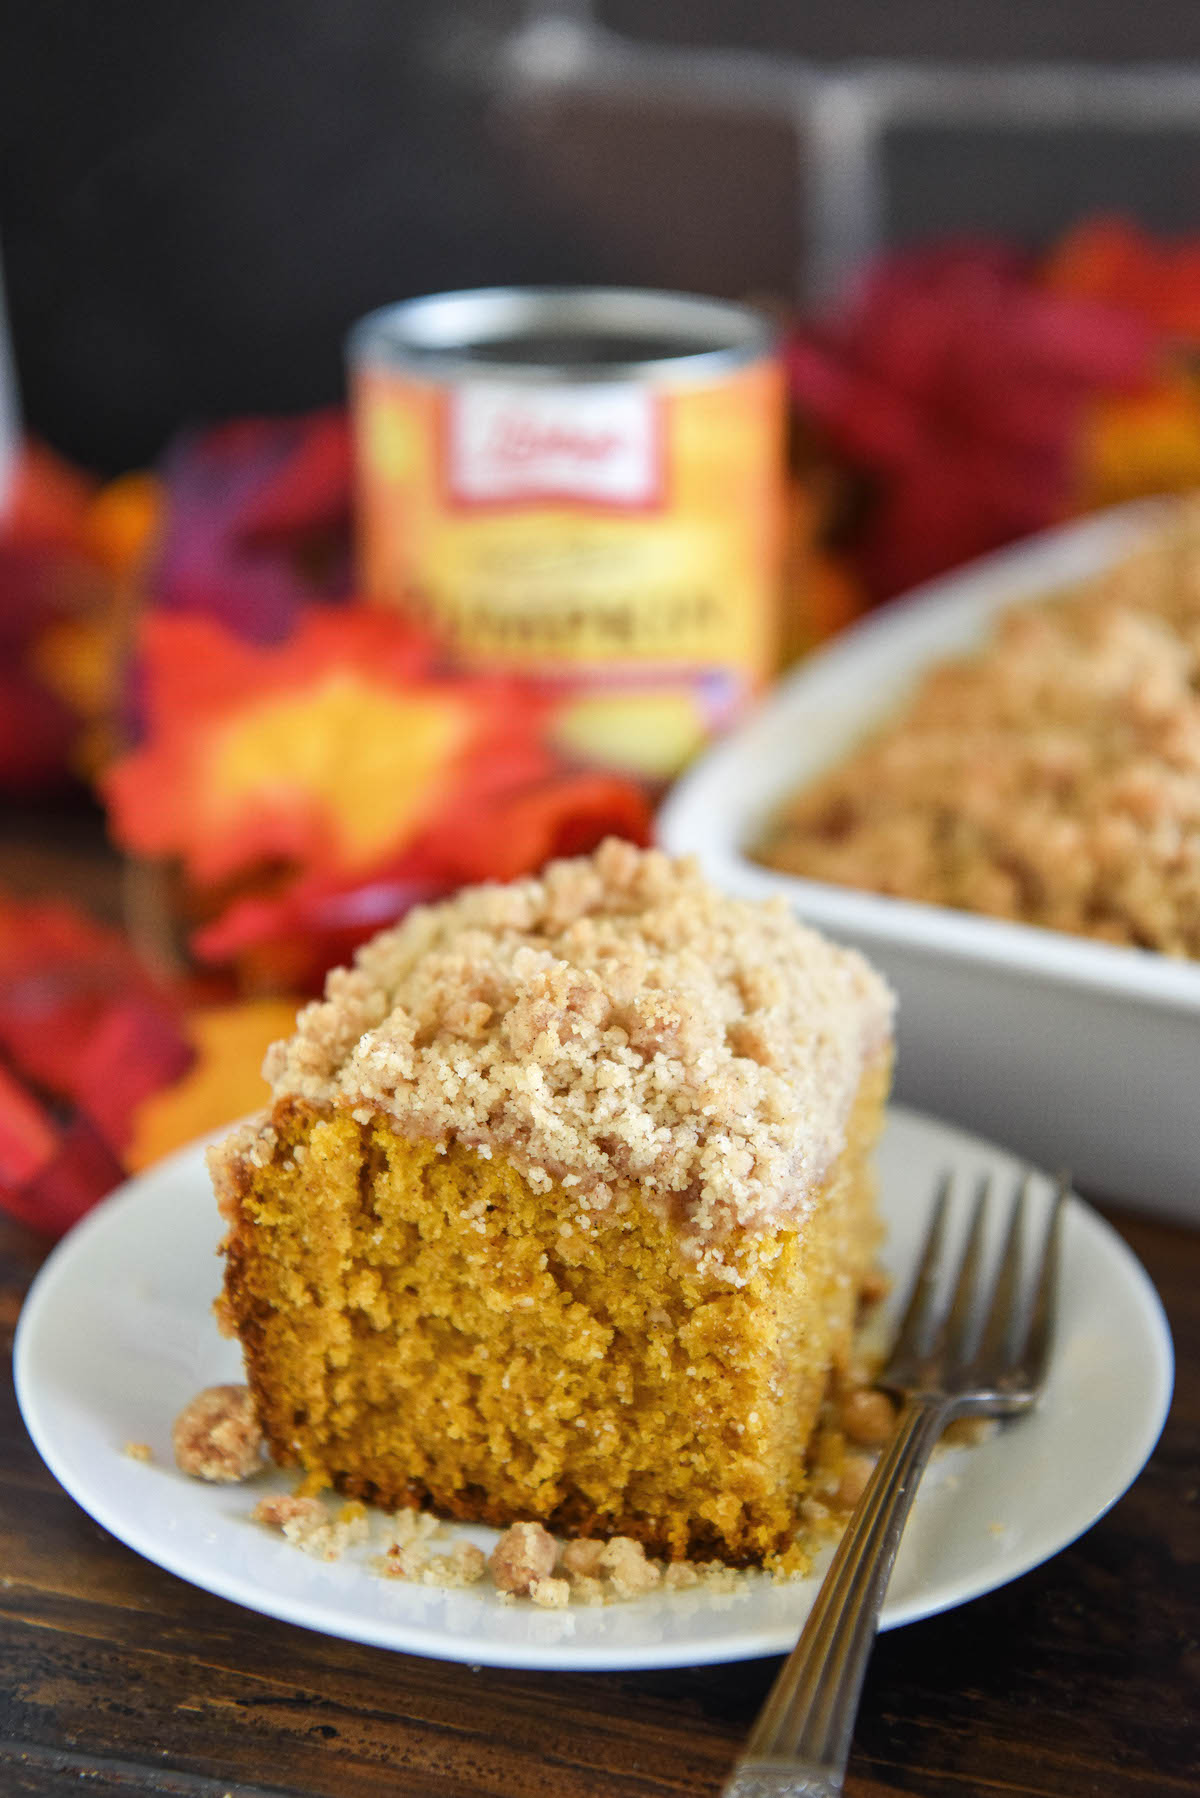 A slice of pumpkin cake with crumb topping on a plate with a fork.